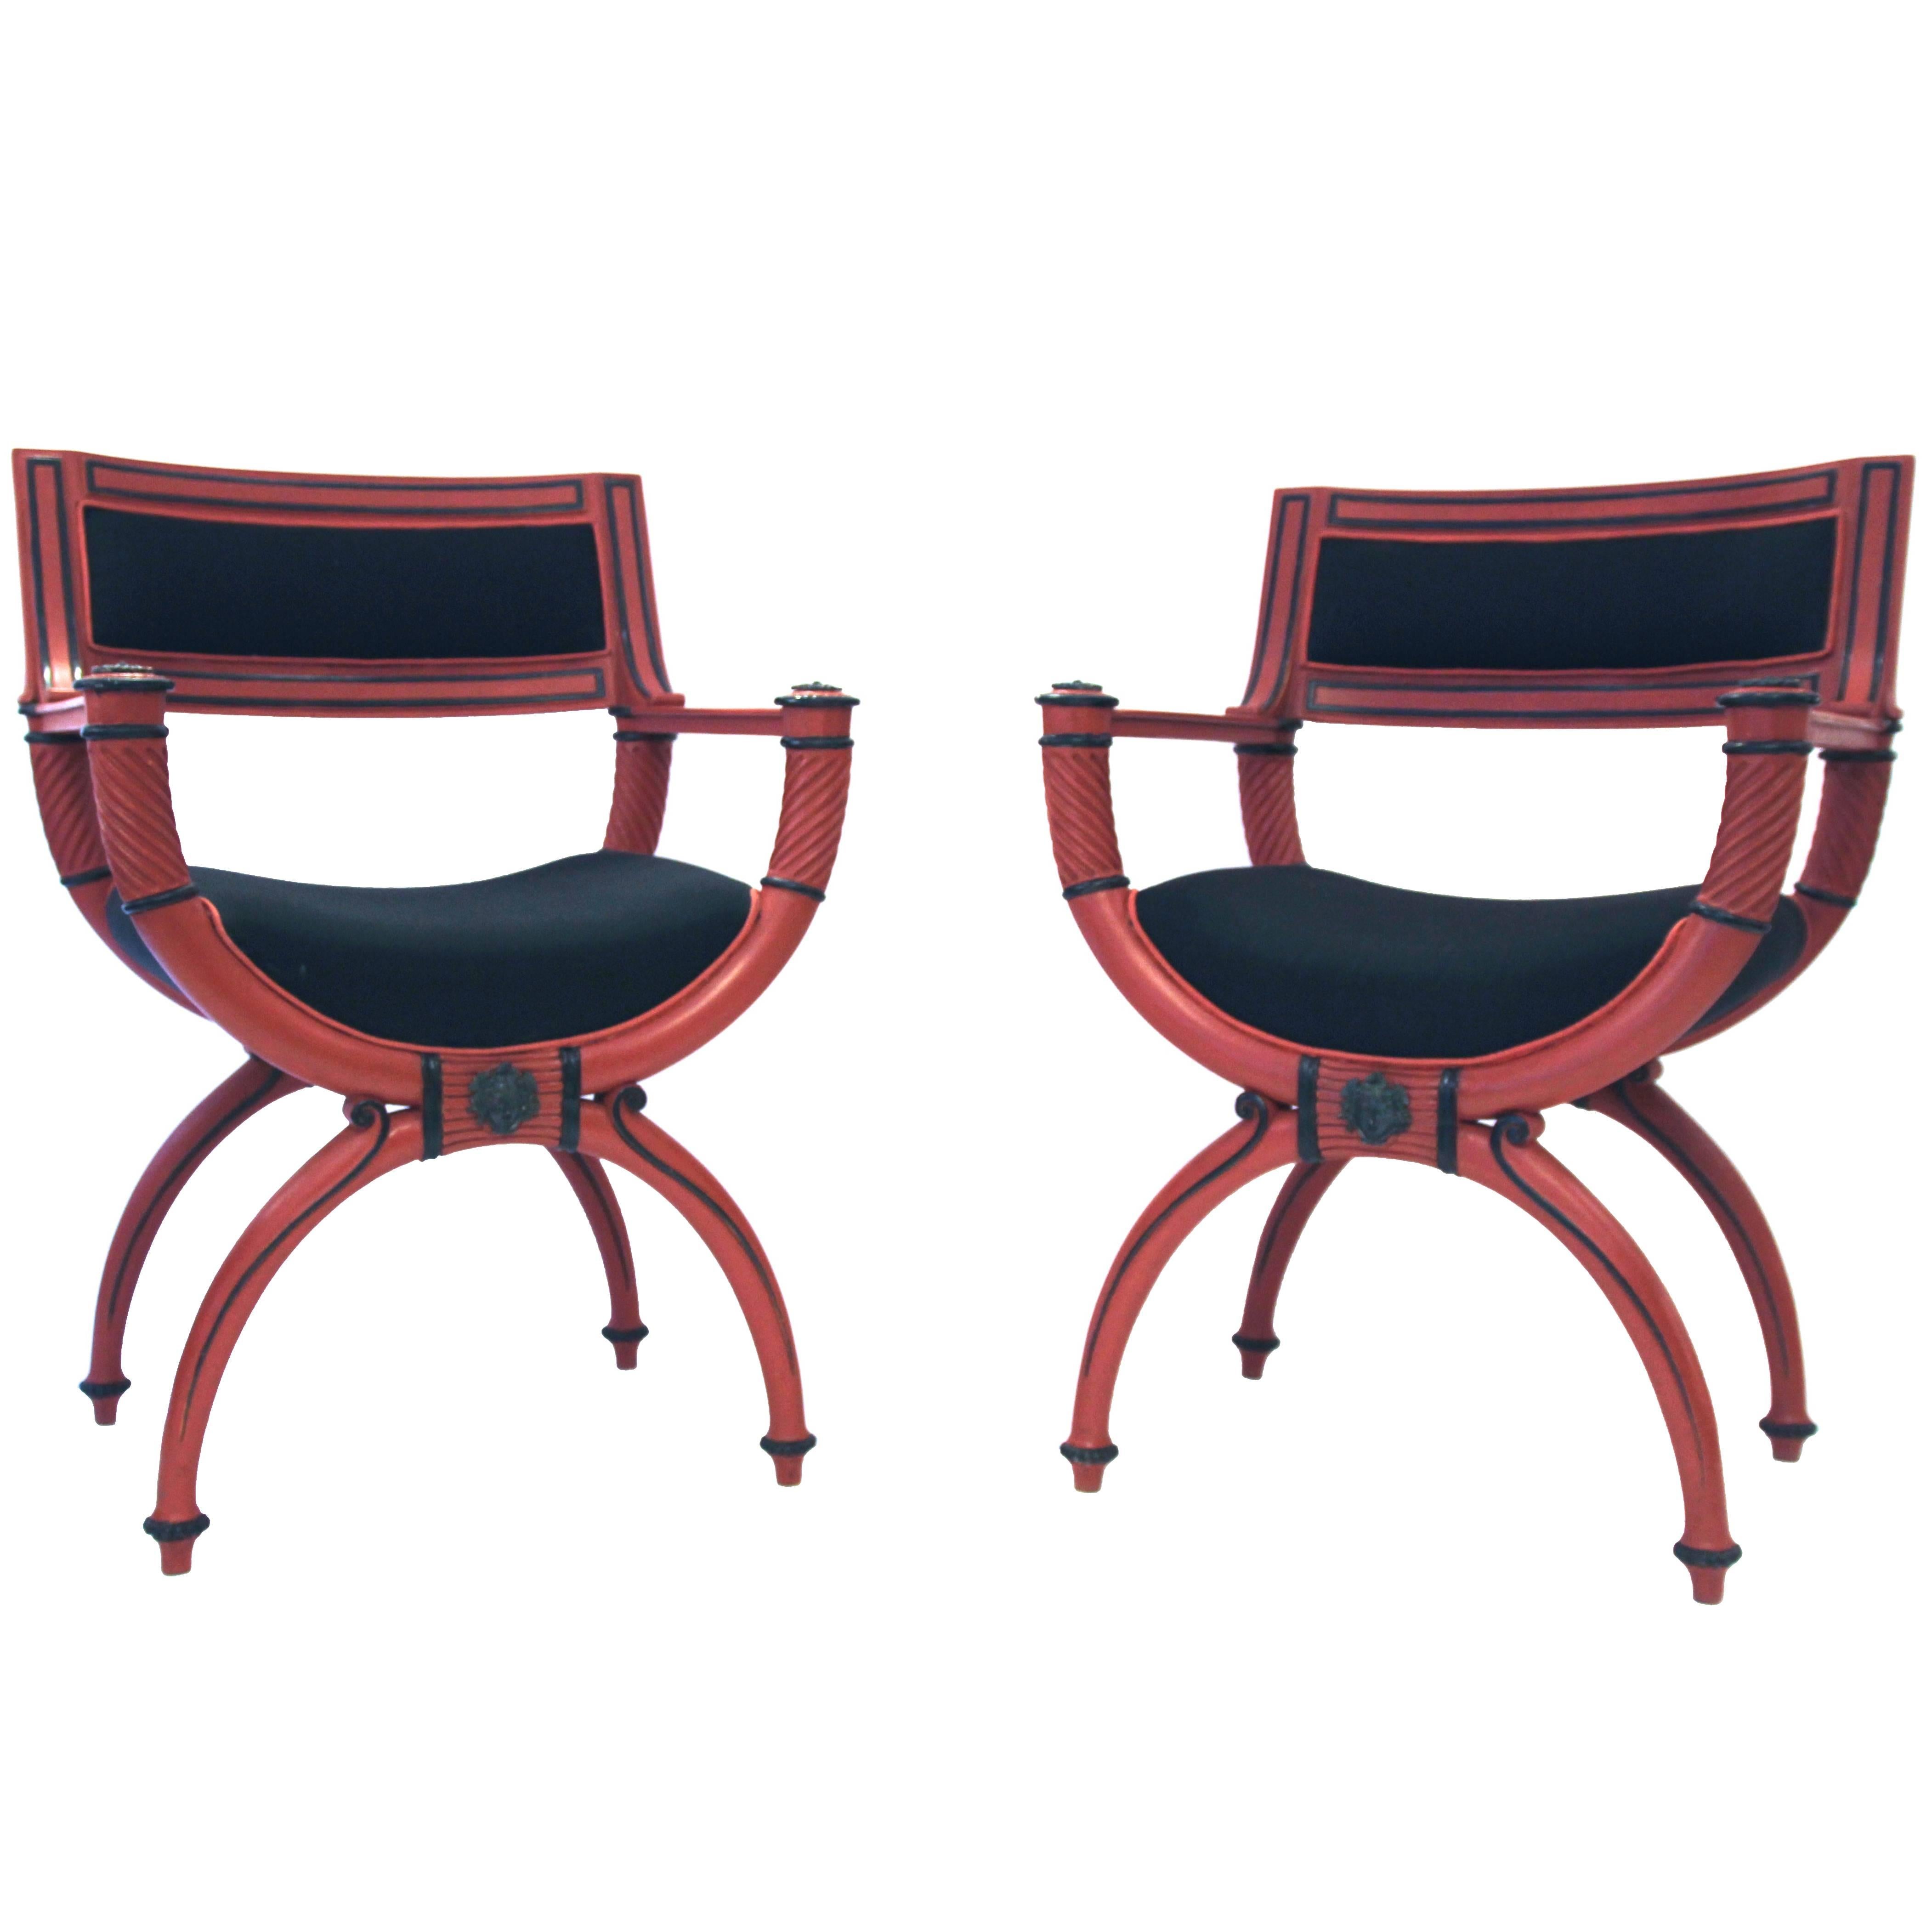 Set of Four Armchairs, Red Lacquer, Neo-Pompeiian Style, circa 1970, France